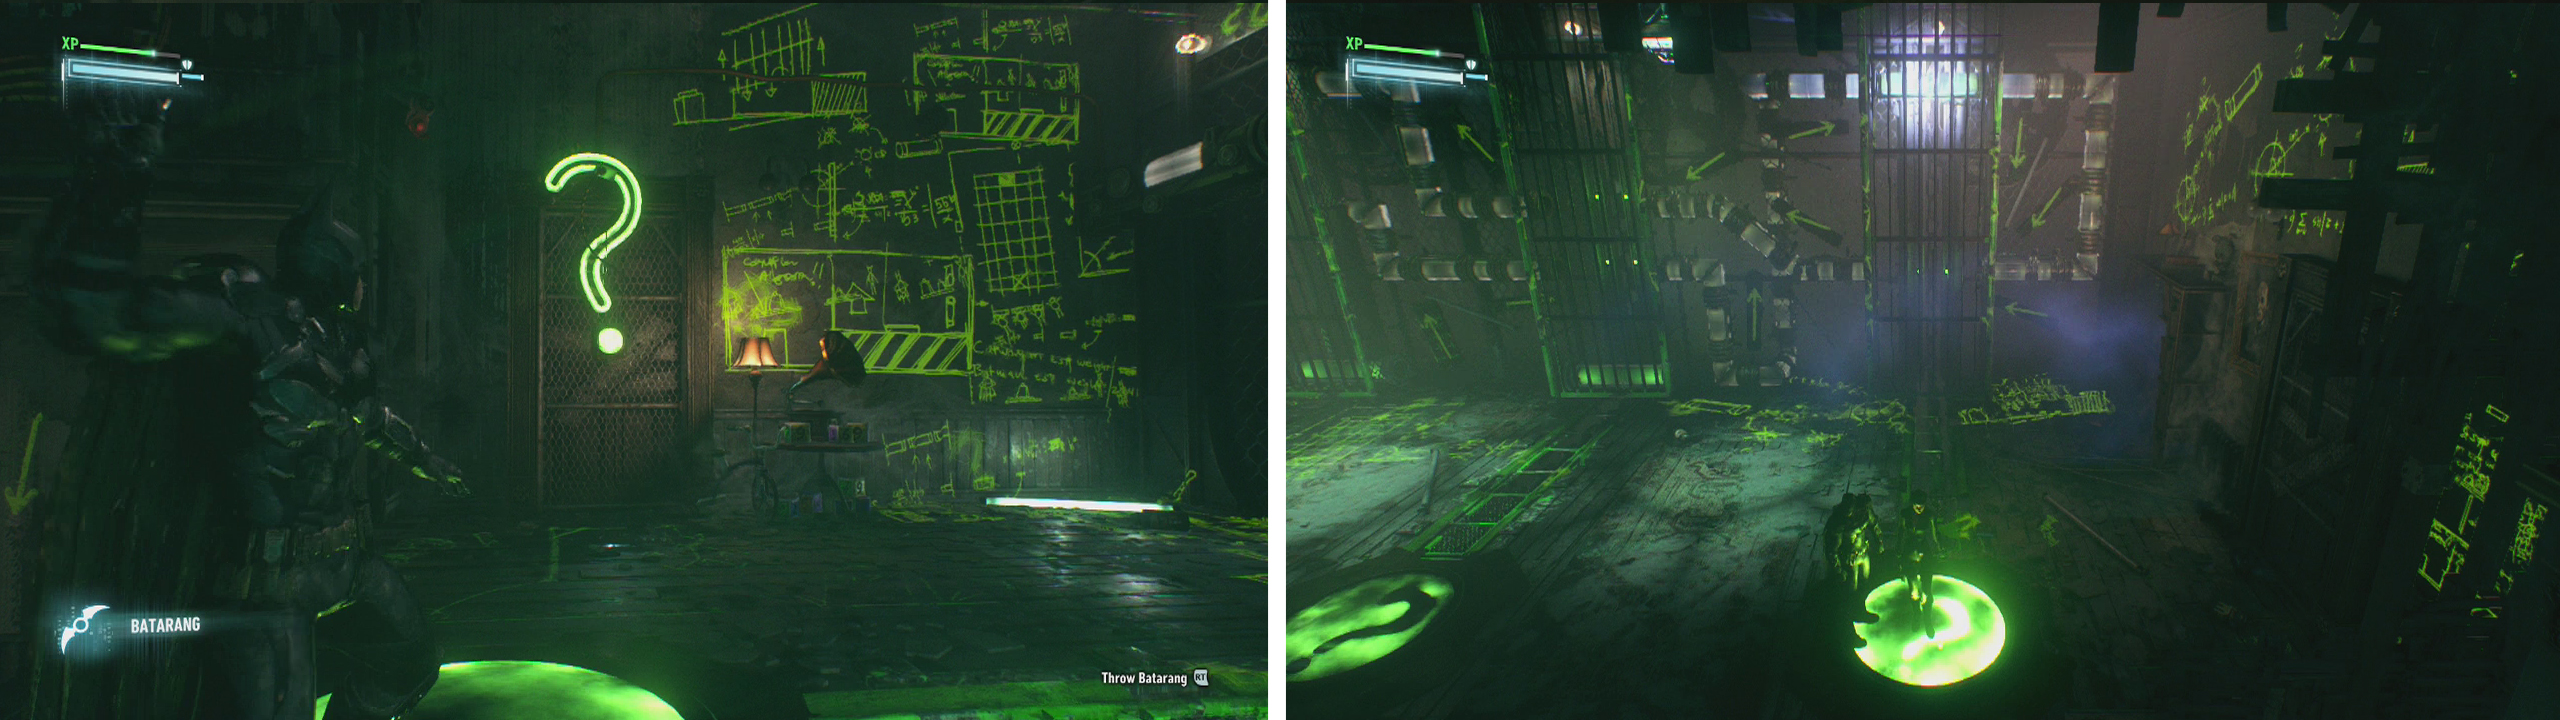 Step on the button to make the floor safe (left) and then fight off the Riddler Robots that show up (right).